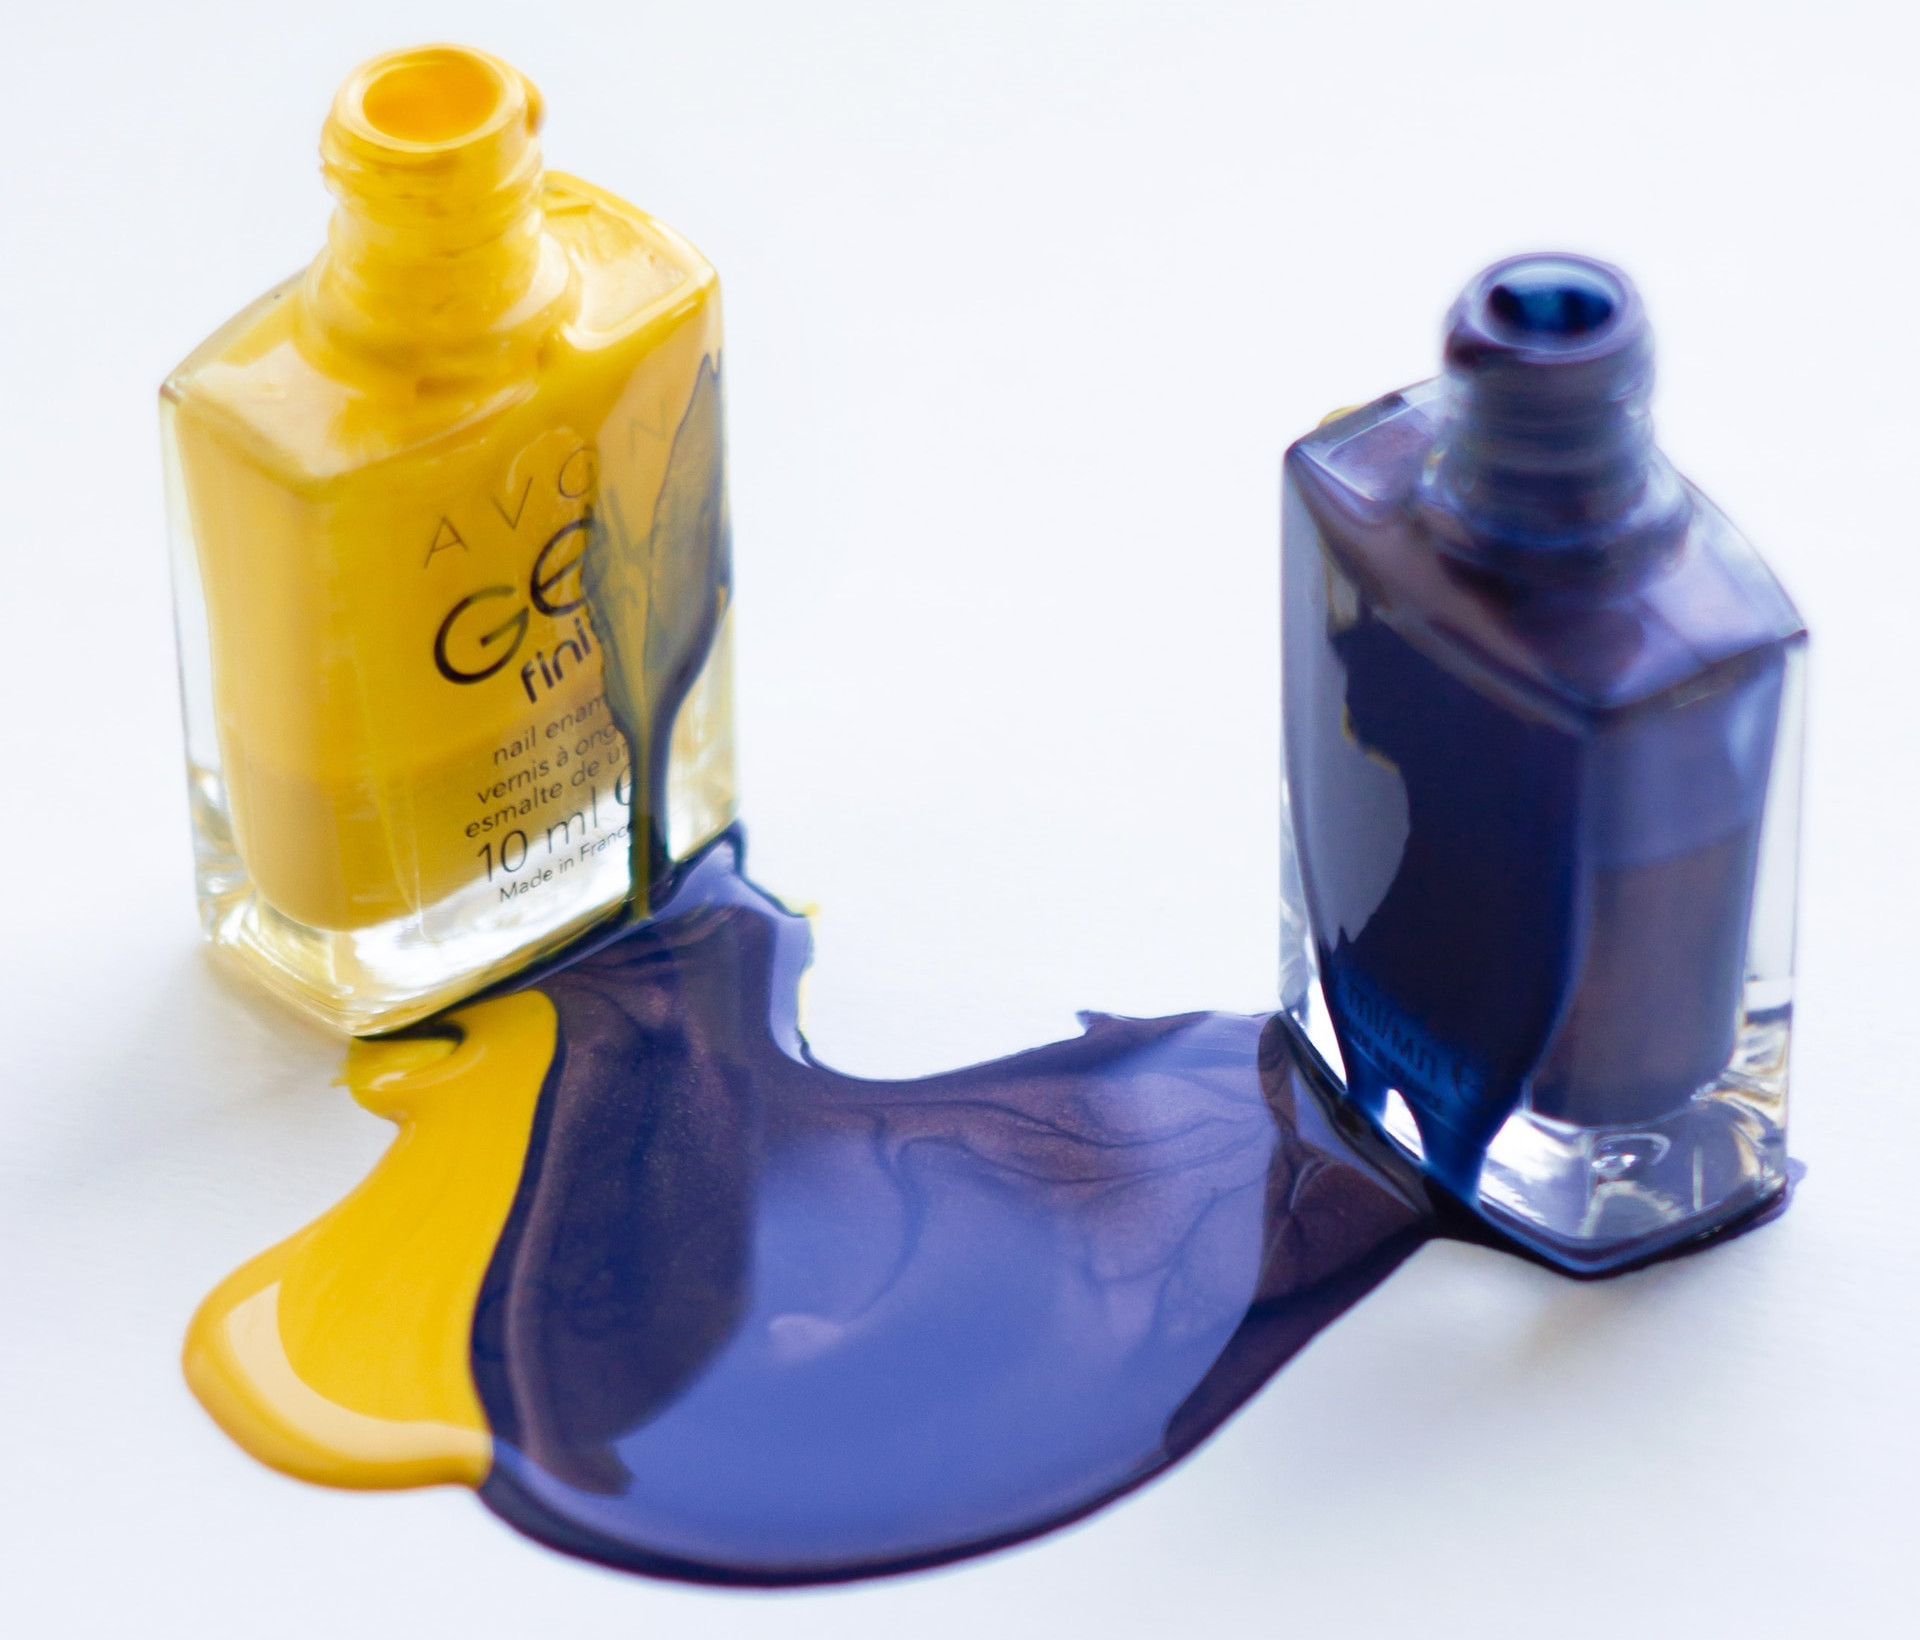 Two bottles of ink, spilling and mixing